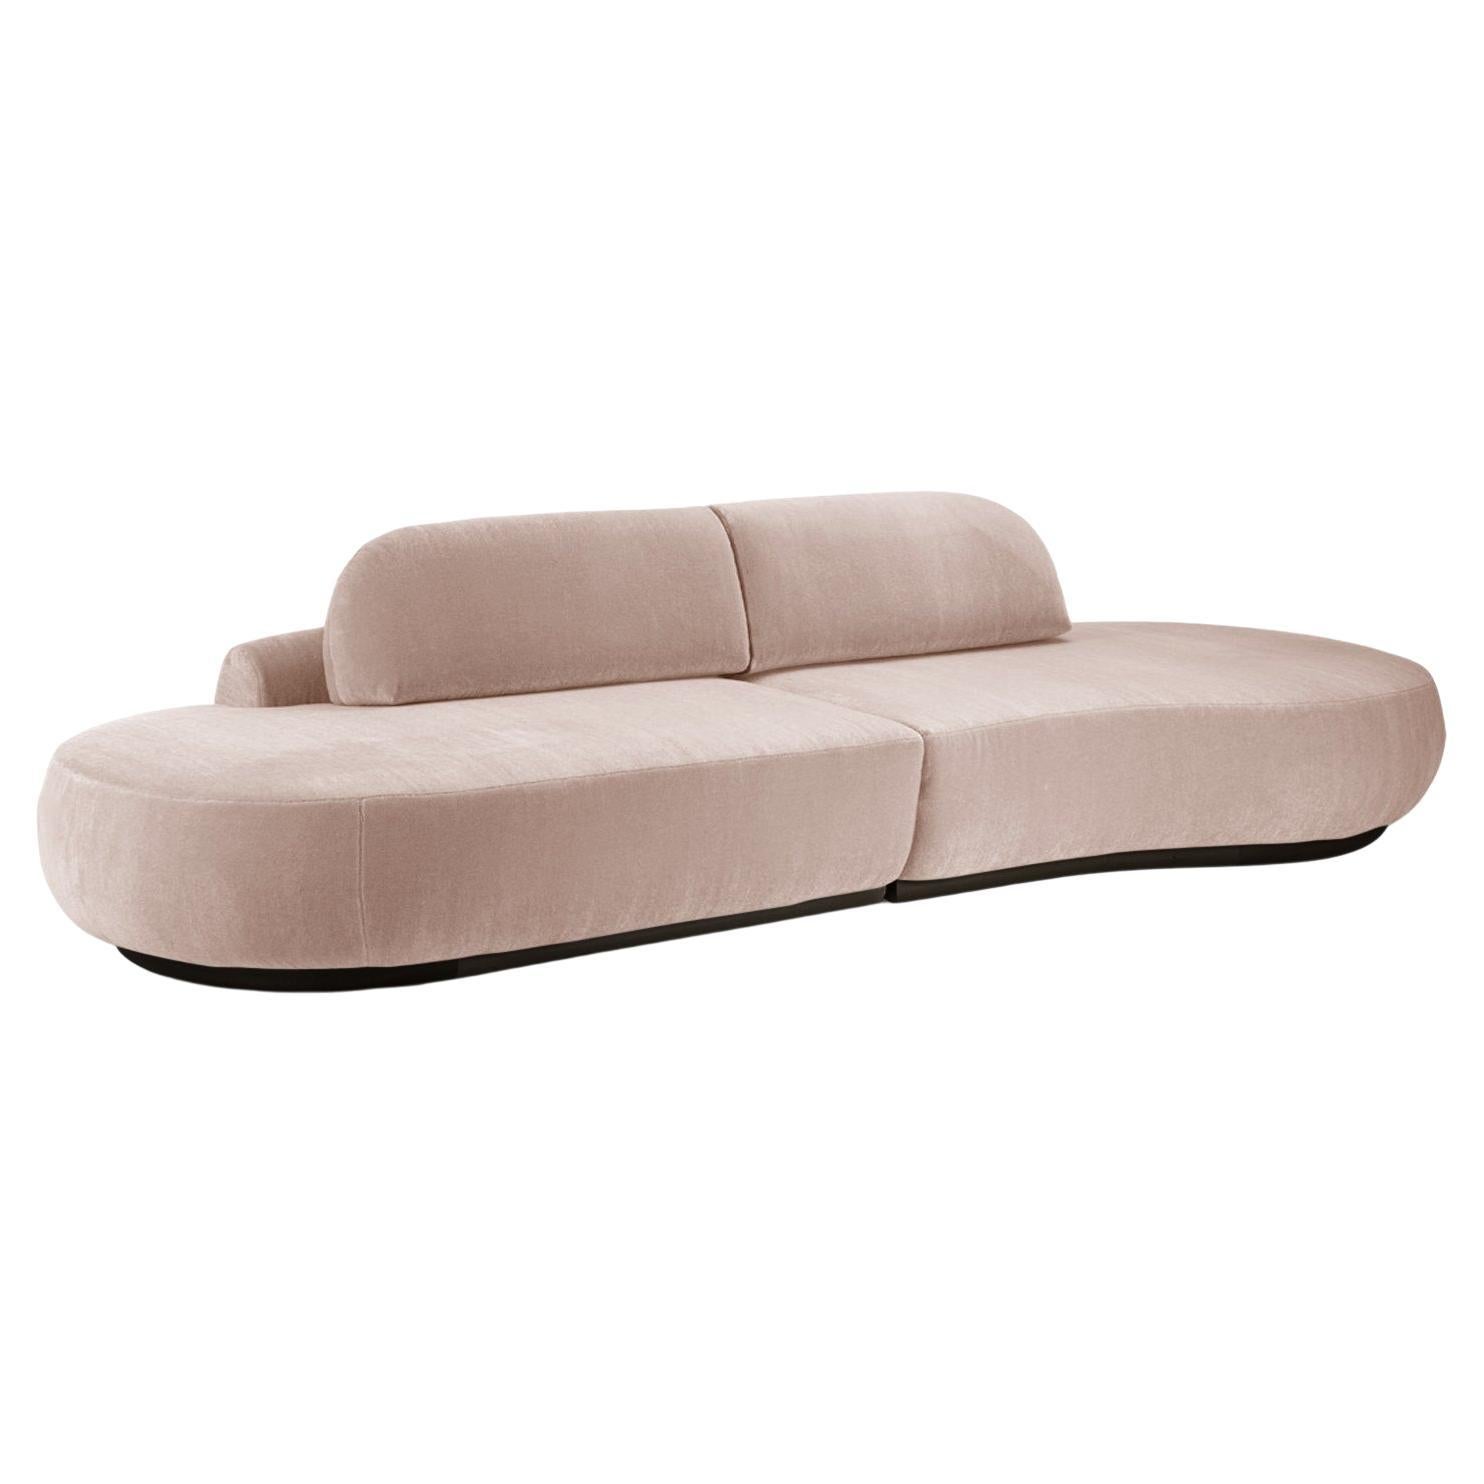 Naked Curved Sectional Sofa, 2 Piece with Beech Ash-056-5 and Vigo Blossom For Sale